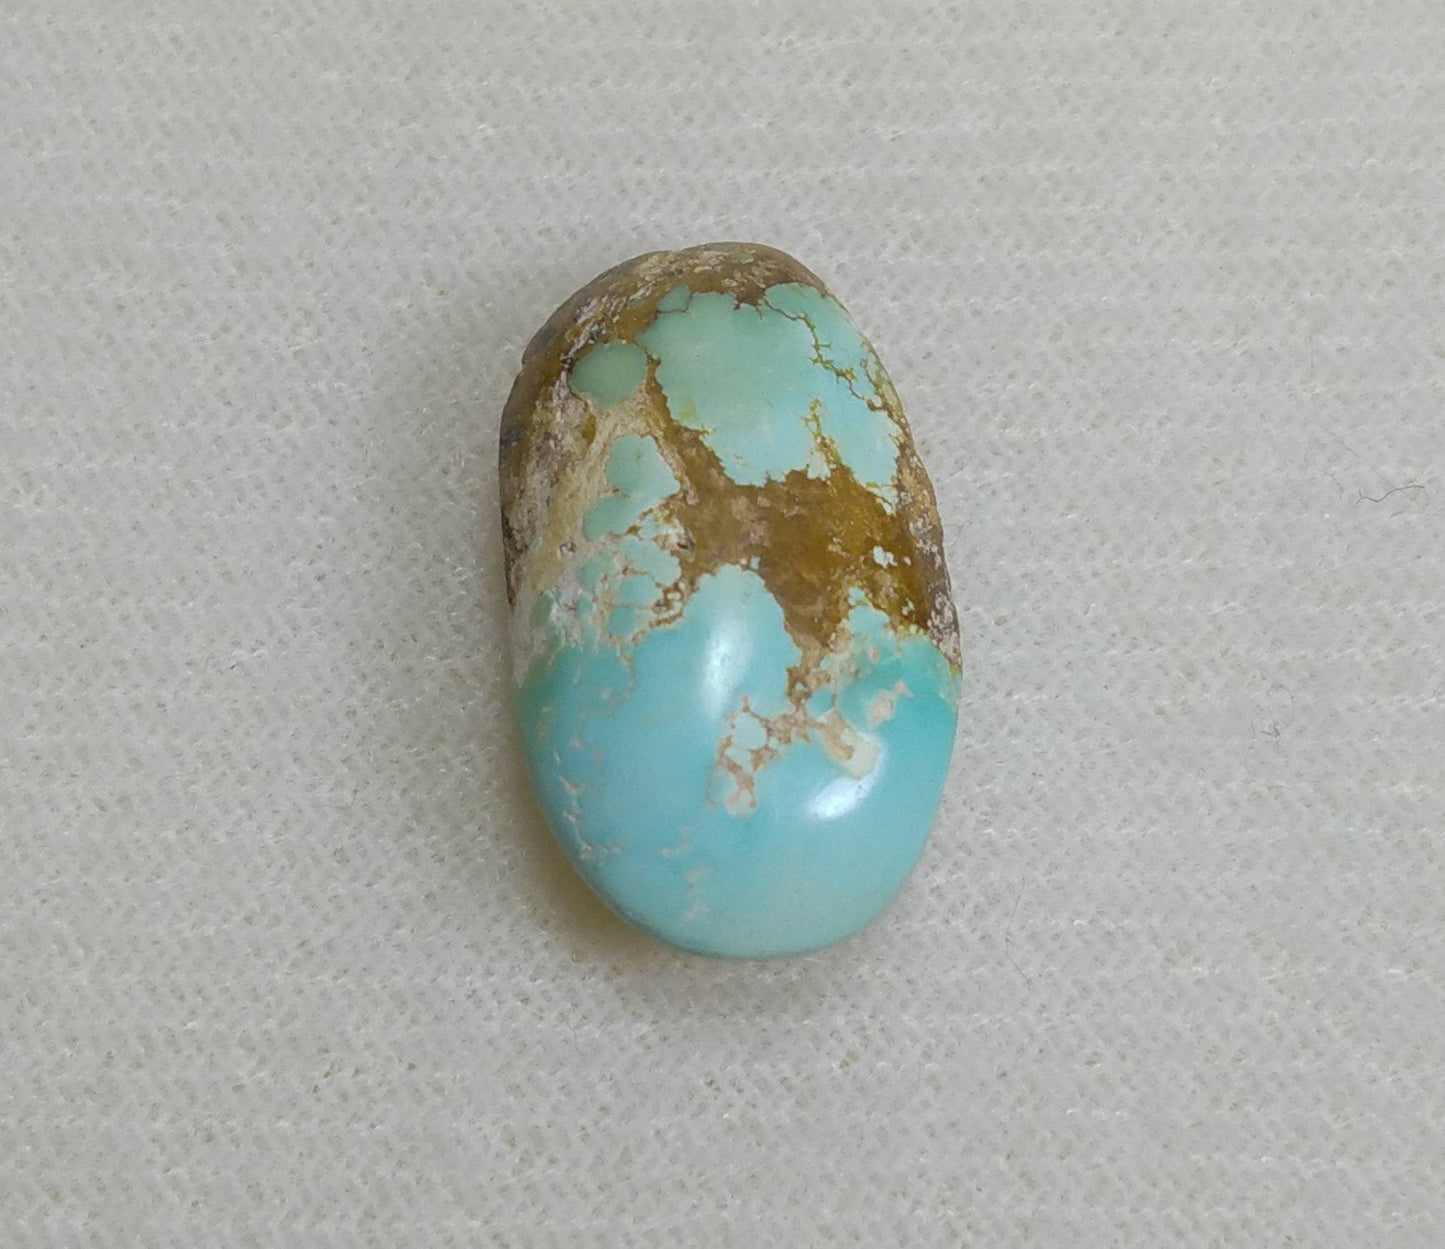 ARSAA GEMS AND MINERALSNatural top quality beautiful 15 carats untreated unheated oval shape turquoise cabochon - Premium  from ARSAA GEMS AND MINERALS - Just $15.00! Shop now at ARSAA GEMS AND MINERALS